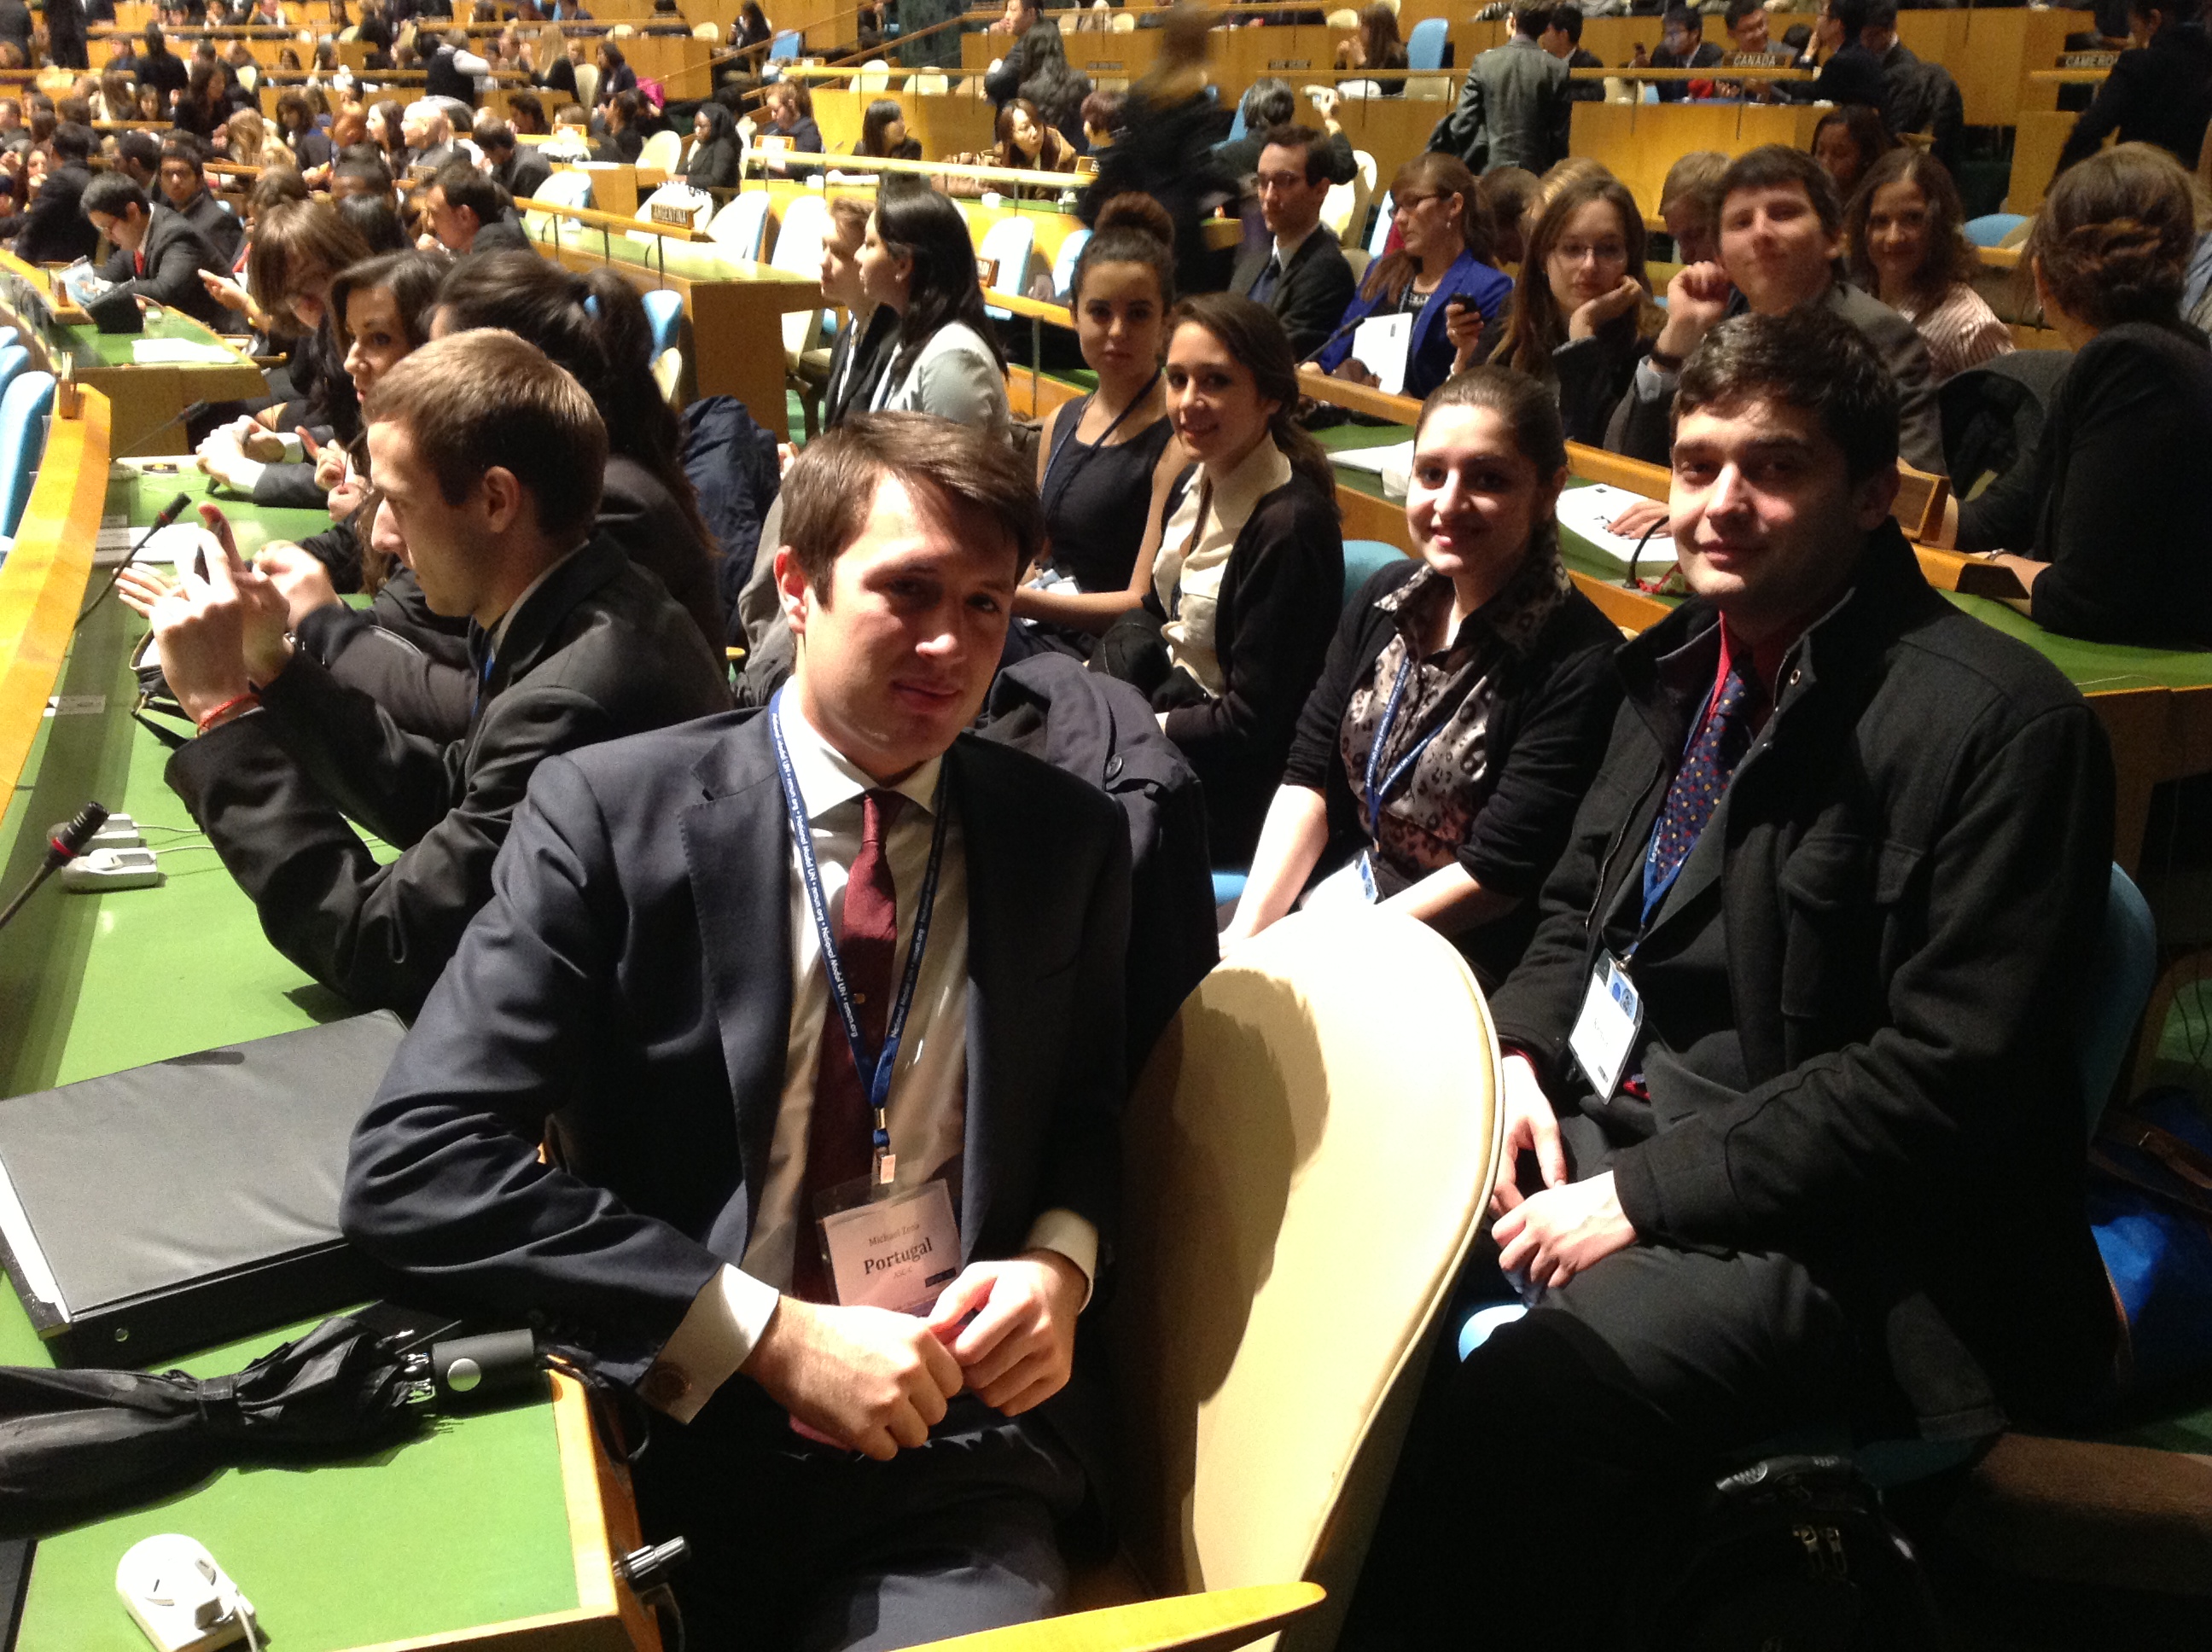 Pace University students in the General Assembly Room at the 2013 National Model United Nations conference.